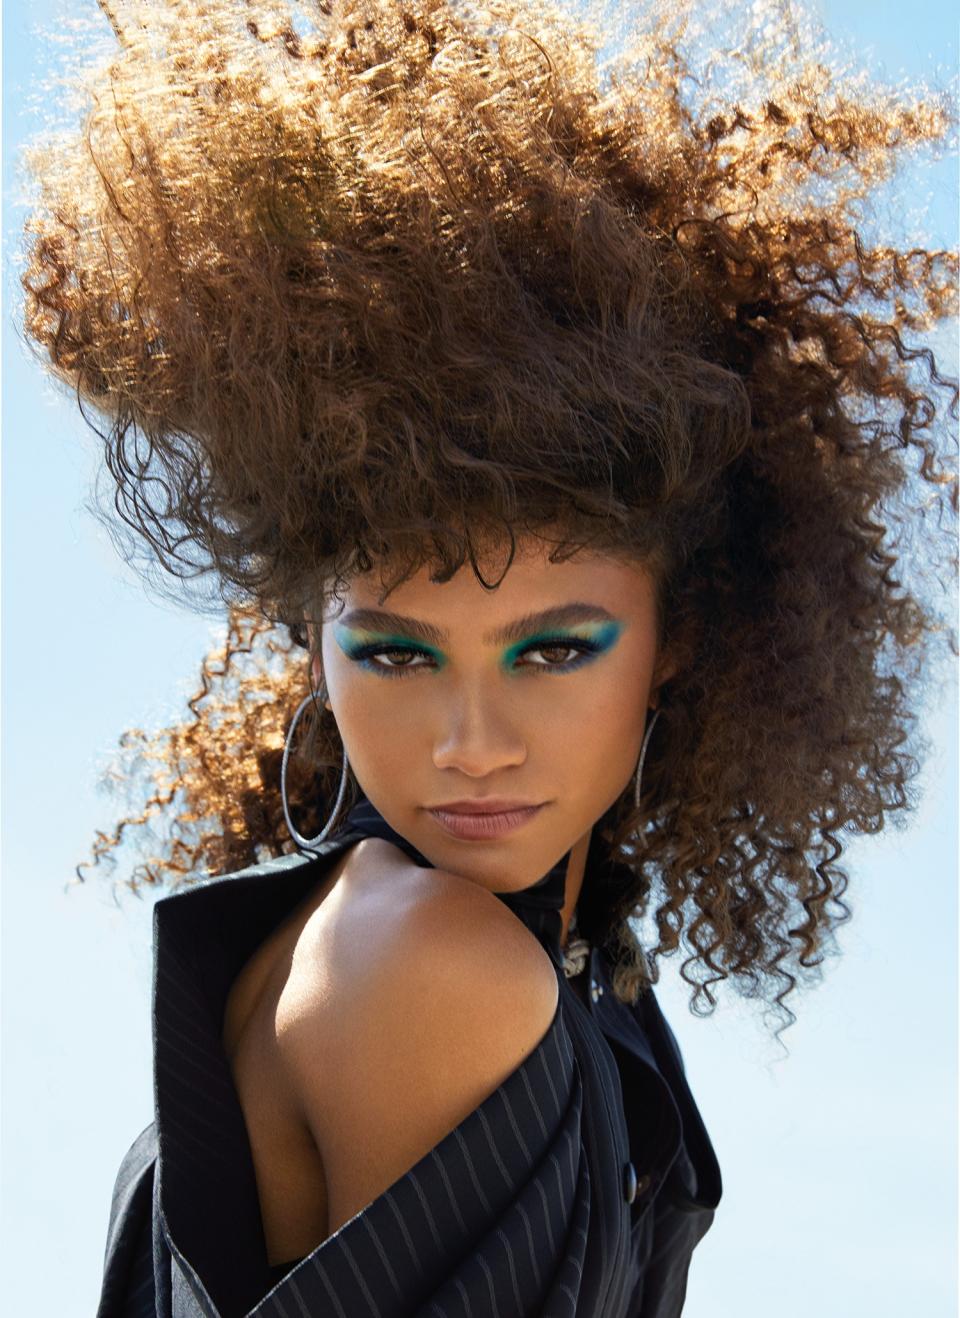 <cite class="credit">Makeup colors: Color Design Eyeshadow Palette in Teal Fury and Brow Define Pencil in Caramel by Lancôme.</cite>